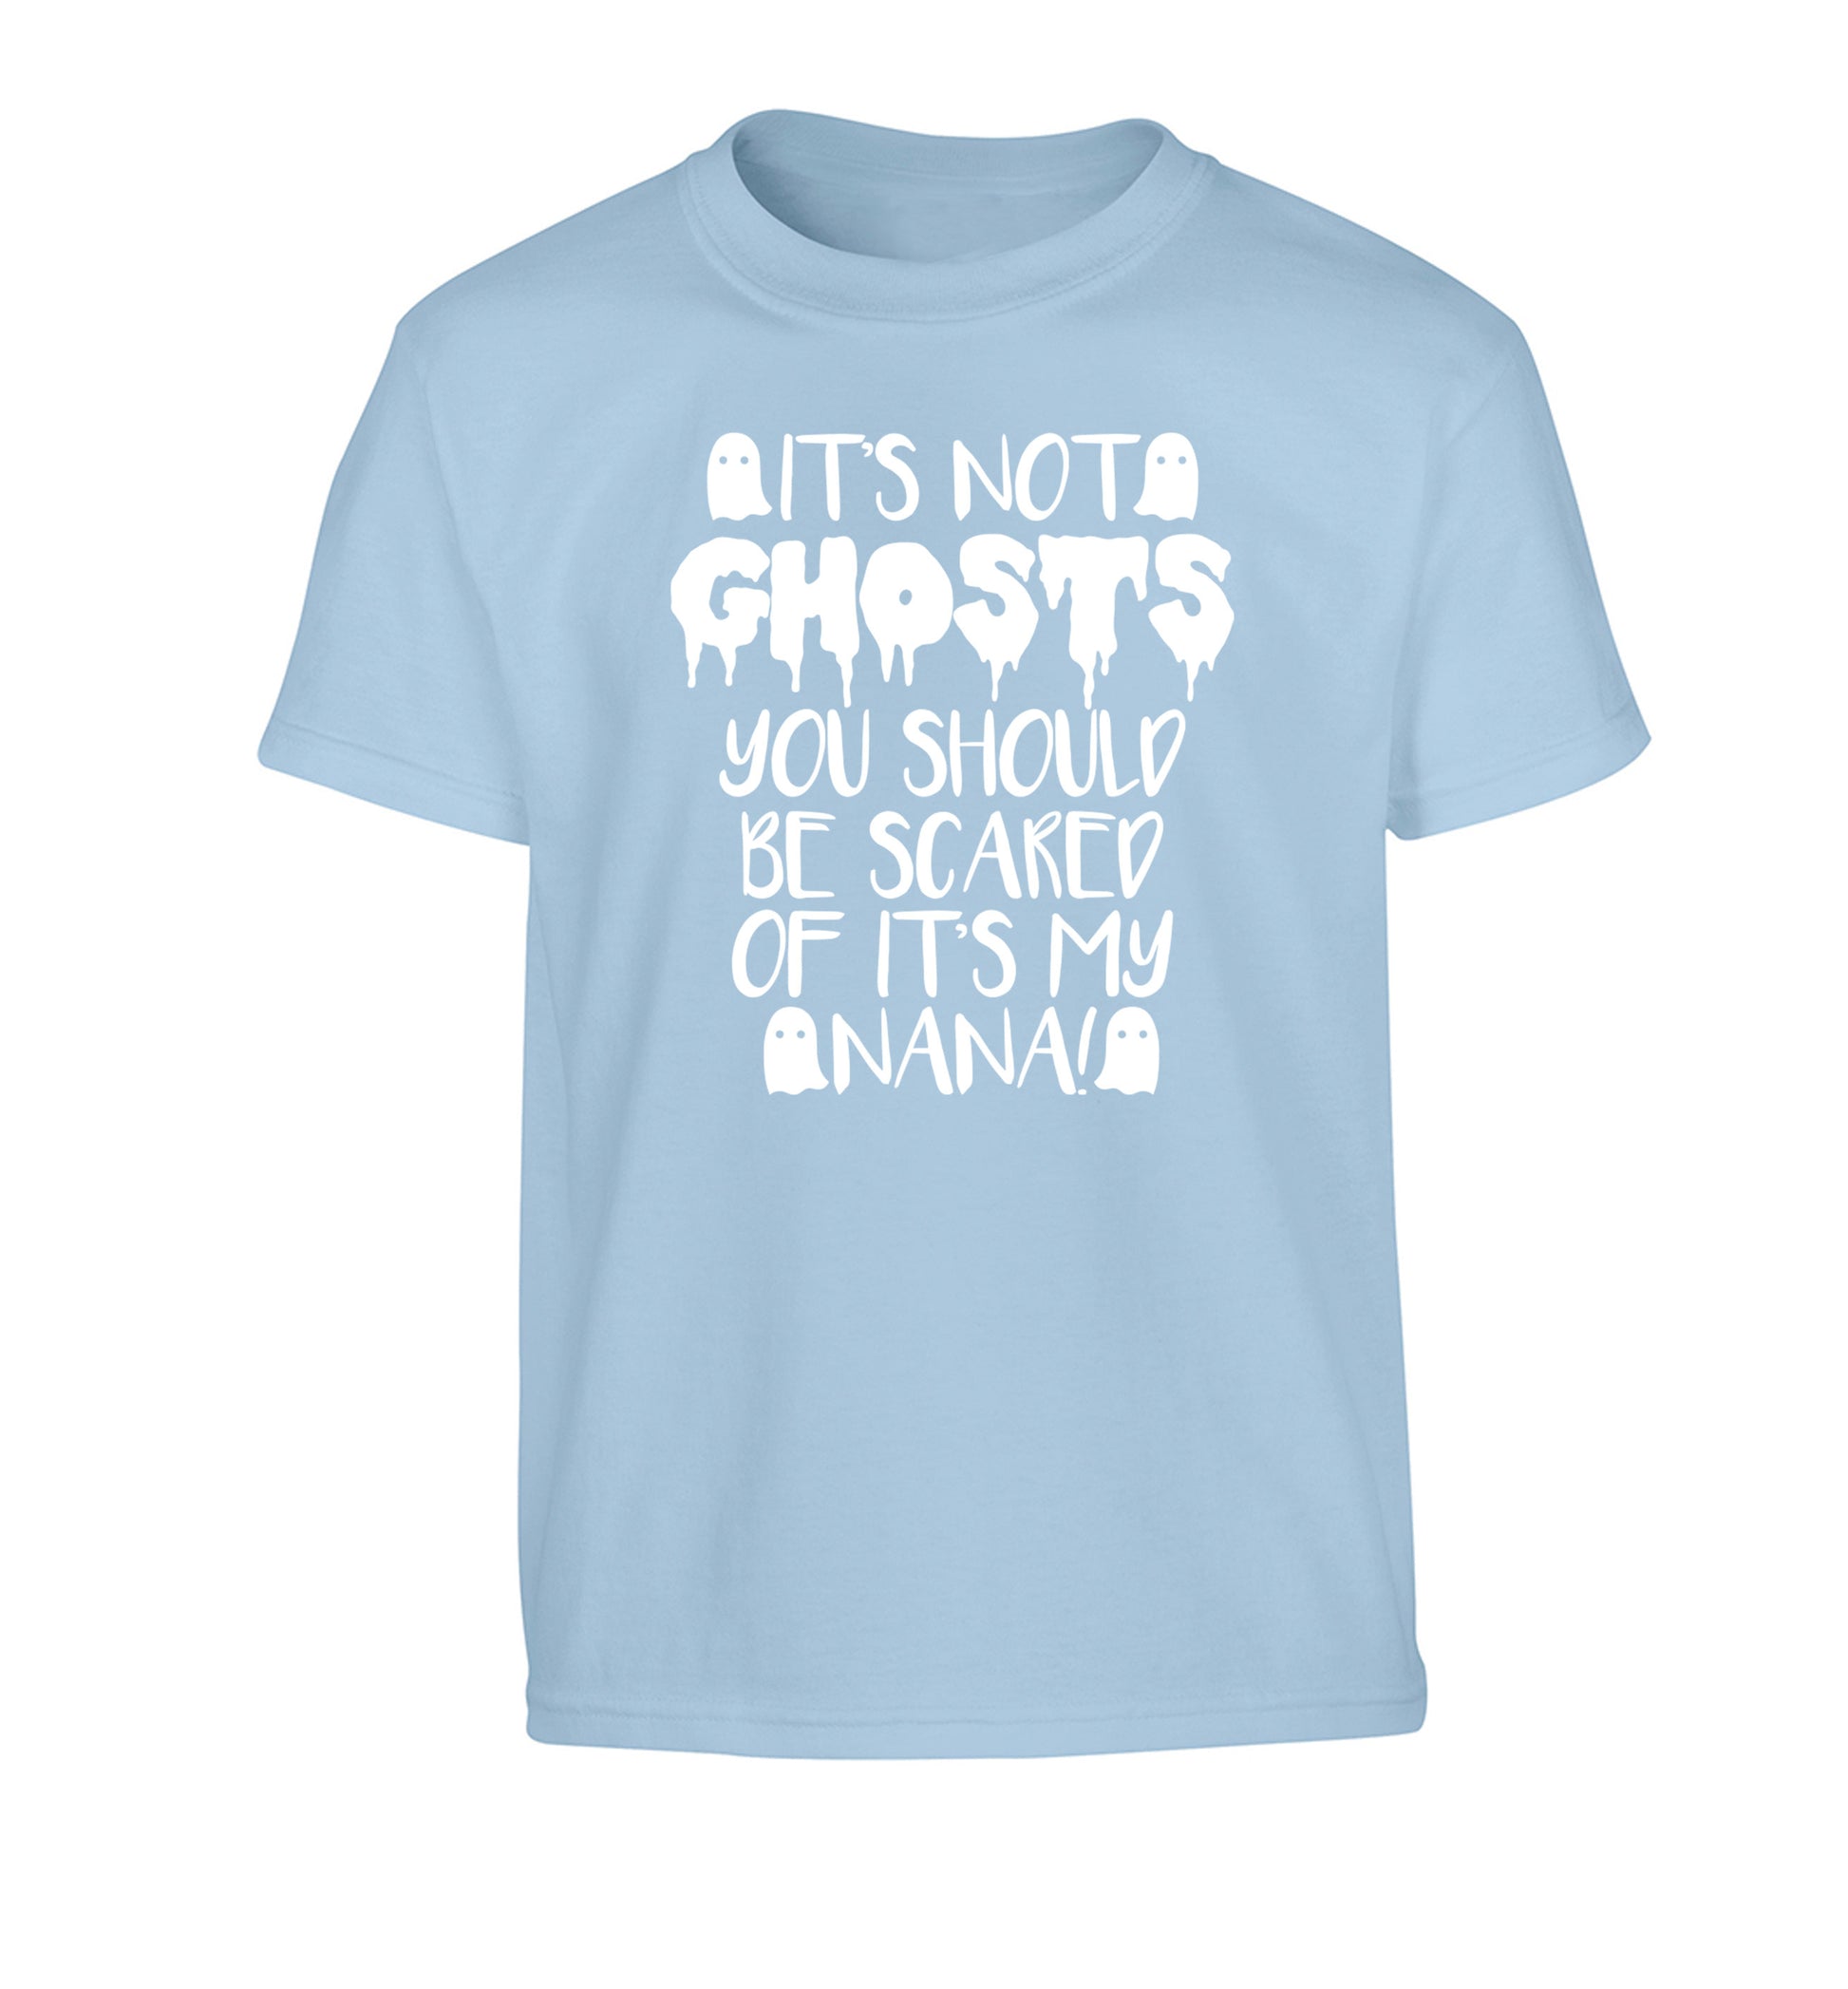 It's not ghosts you should be scared of it's my nana! Children's light blue Tshirt 12-14 Years